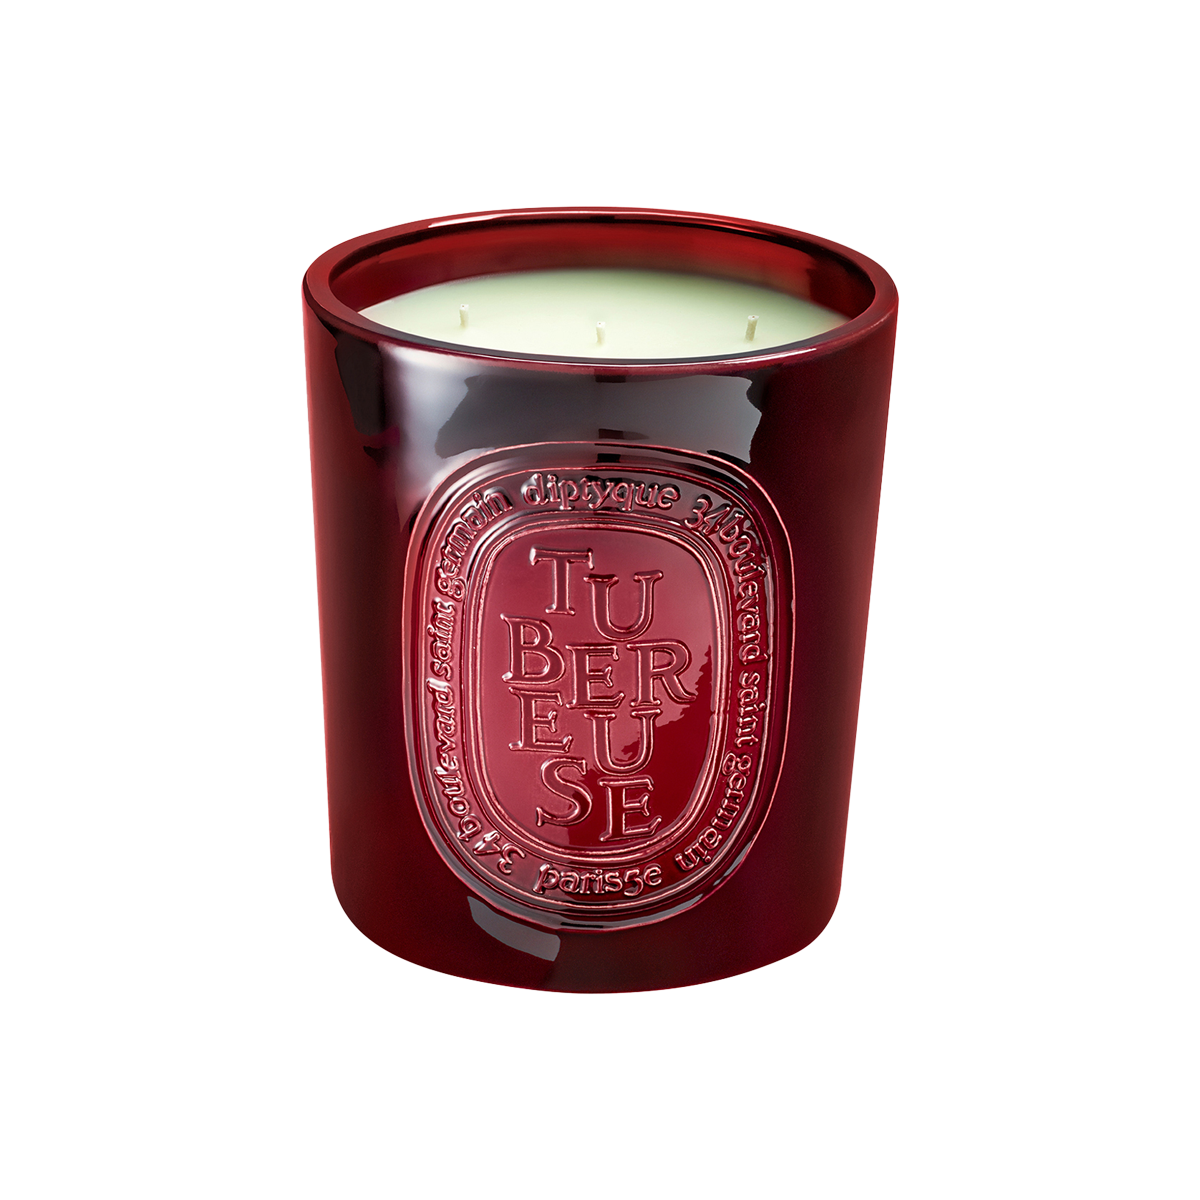 Diptyque - Tubereuse Giant Scented Candle